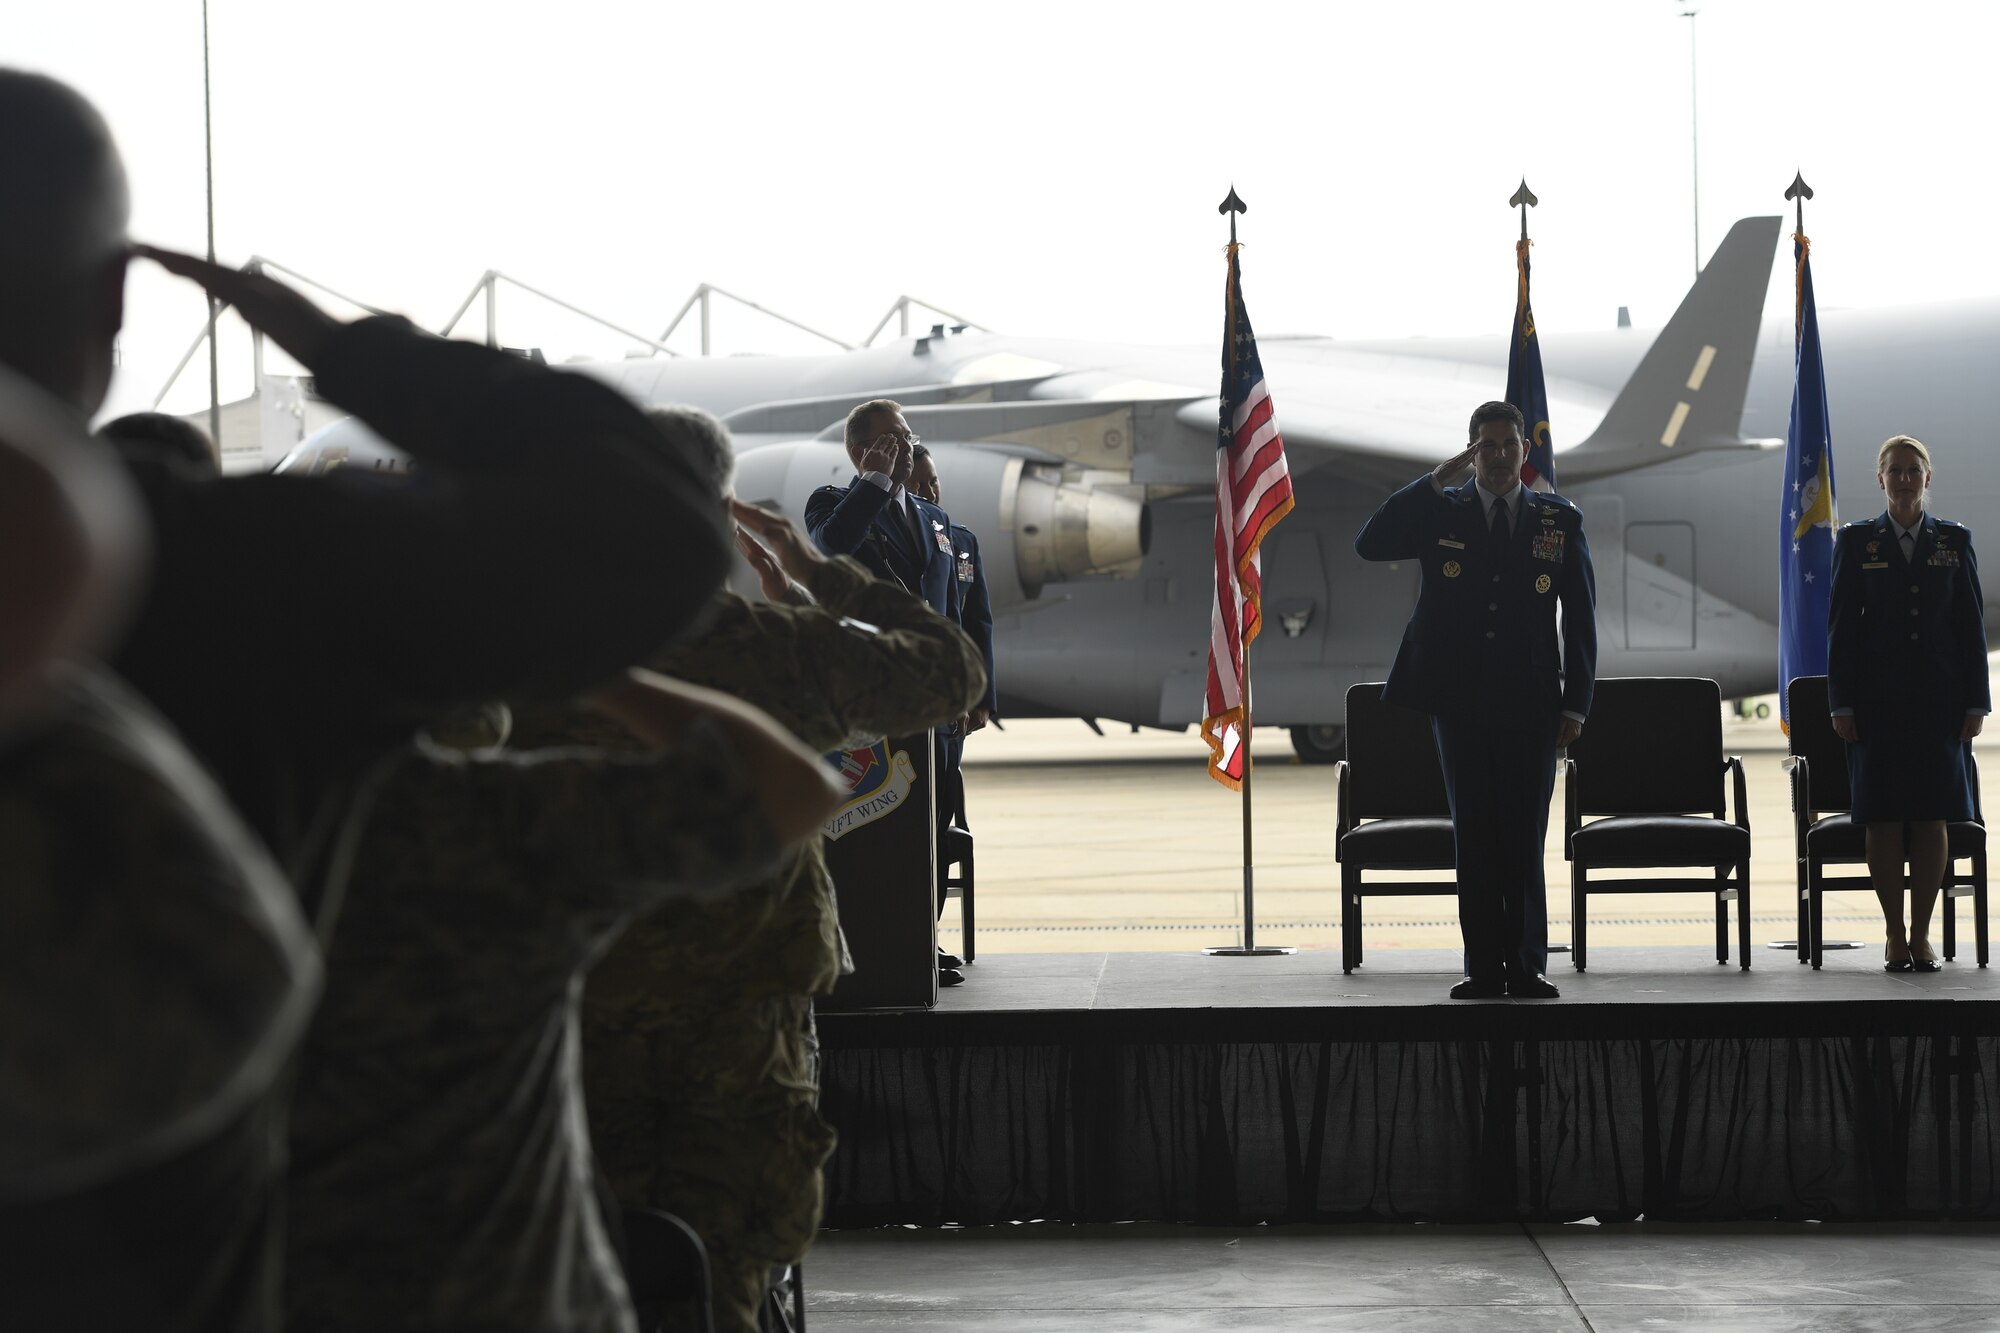 U.S. Air Force Col. Michael Gerock, commander of the 145th Airlift Wing (AW), receives a final salute from members of the unit during a Change of Command Ceremony held at the North Carolina Air National Guard Base, Charlotte Douglas International Airport, June 9, 2018. Gerock will will relinquish command to Col. Bryony Terrell who is the the first female commander for the 145th AW.